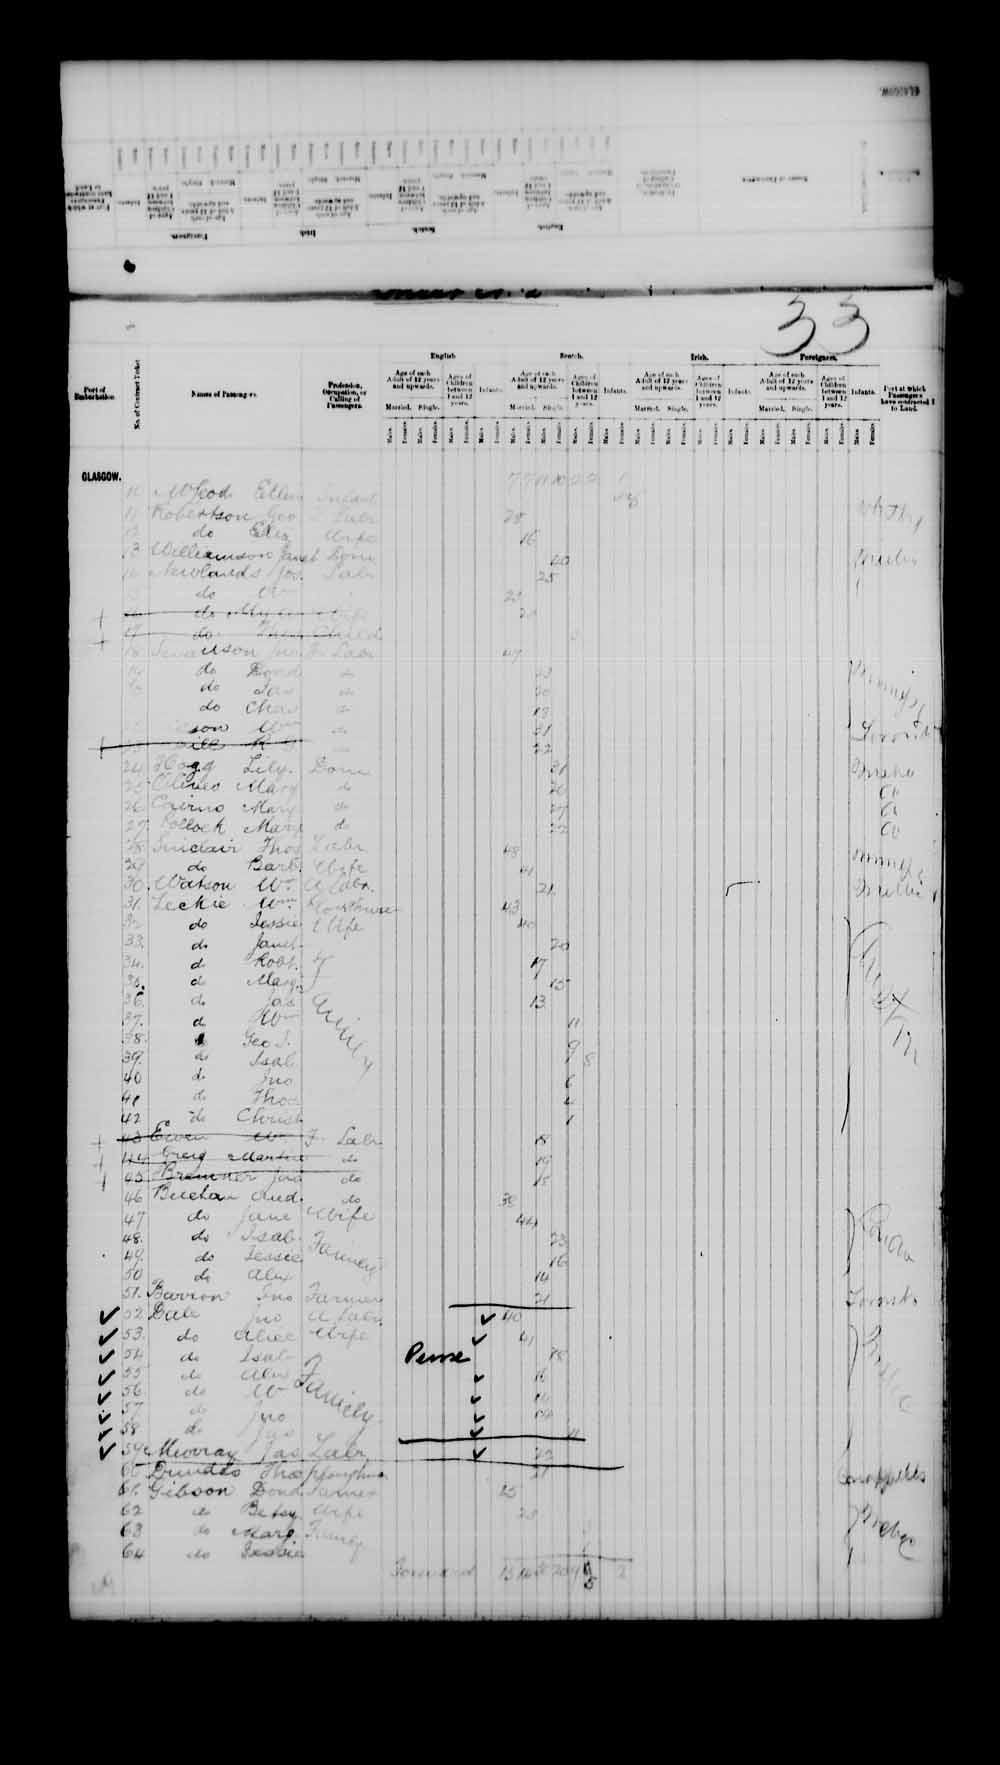 Digitized page of Passenger Lists for Image No.: e003543090